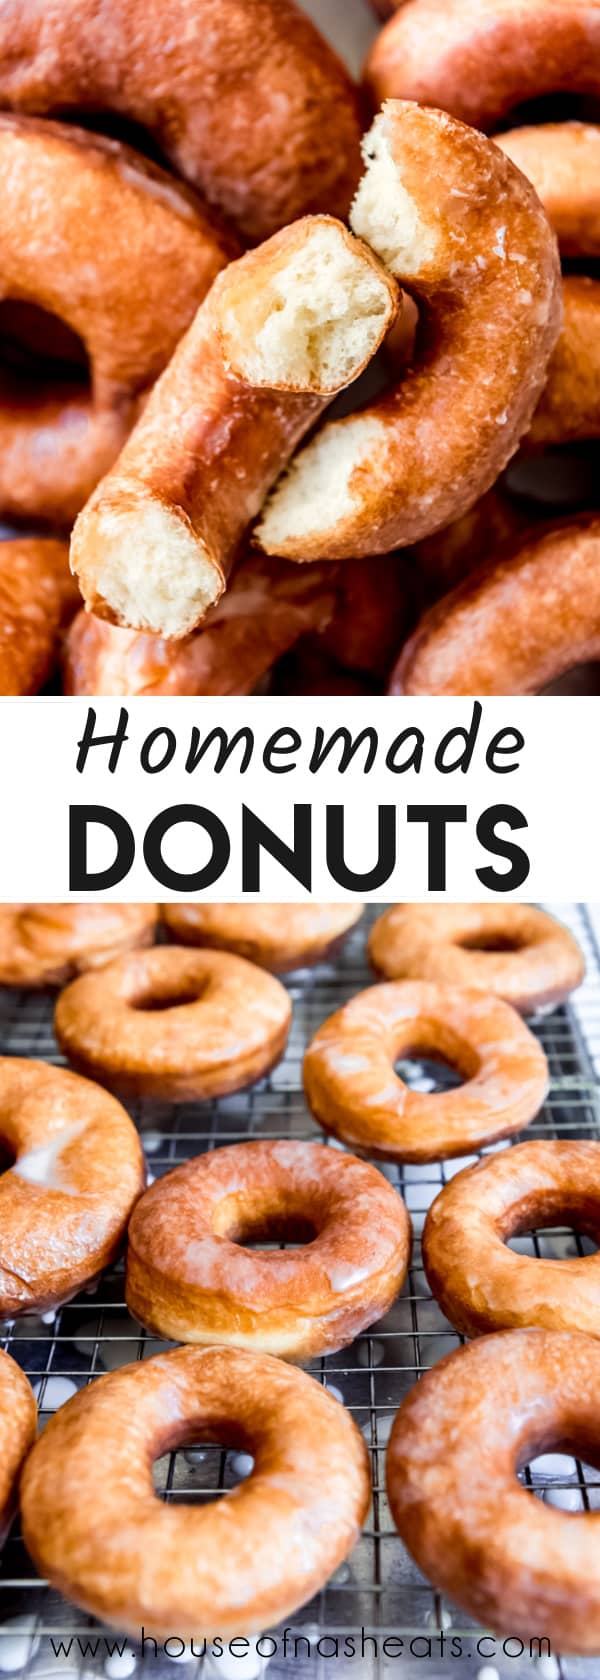 A collage of images of glazed donuts with text overlay.